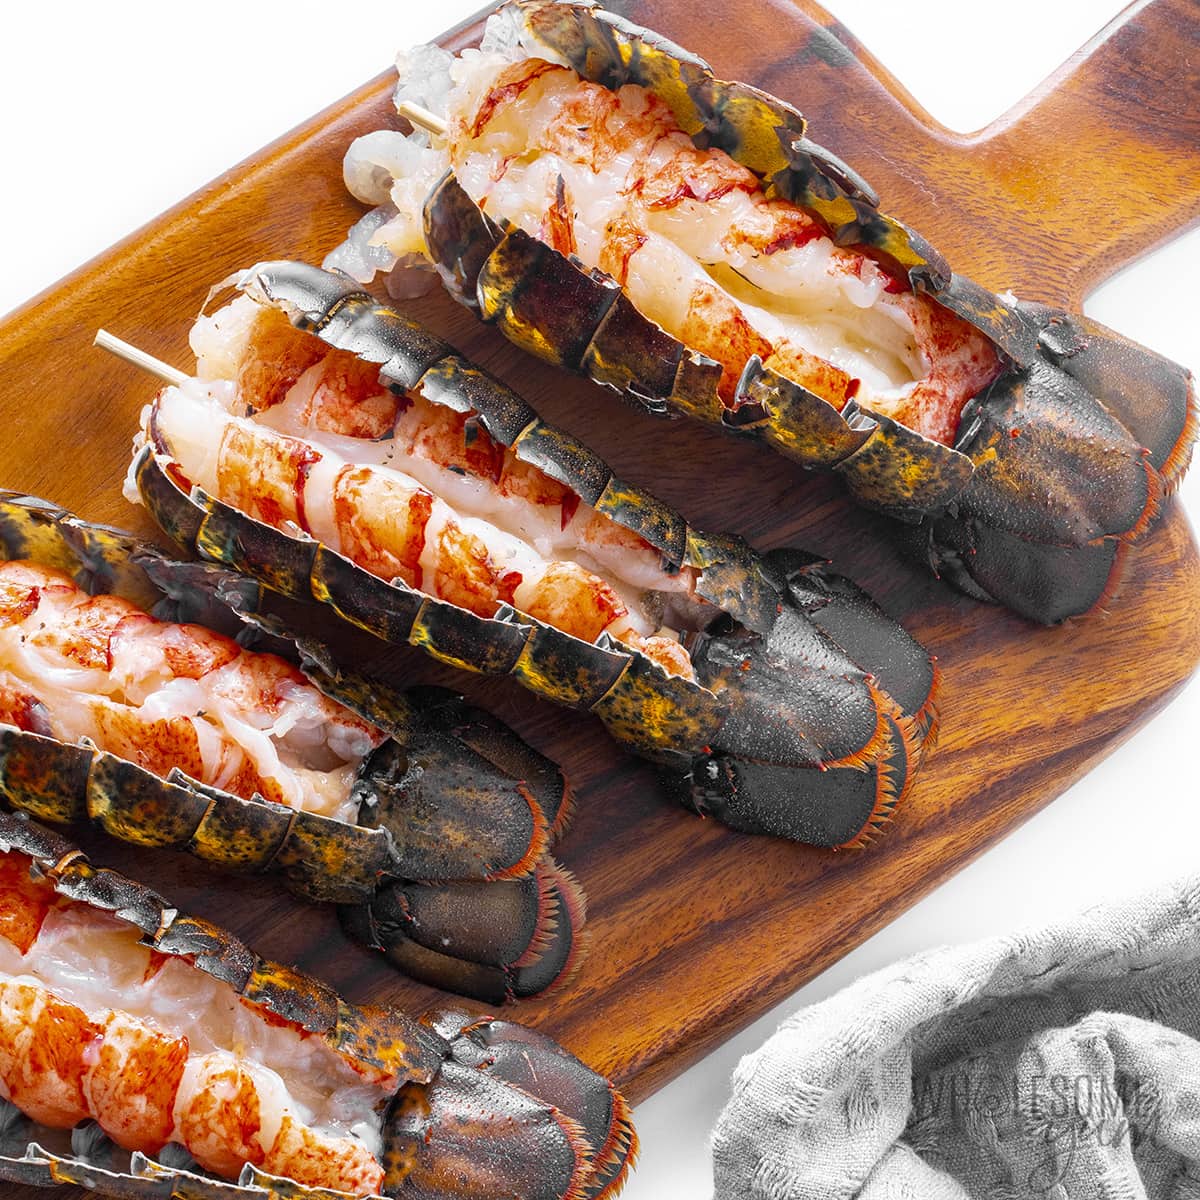 Bamboos skewers run through the meat of lobster tails.